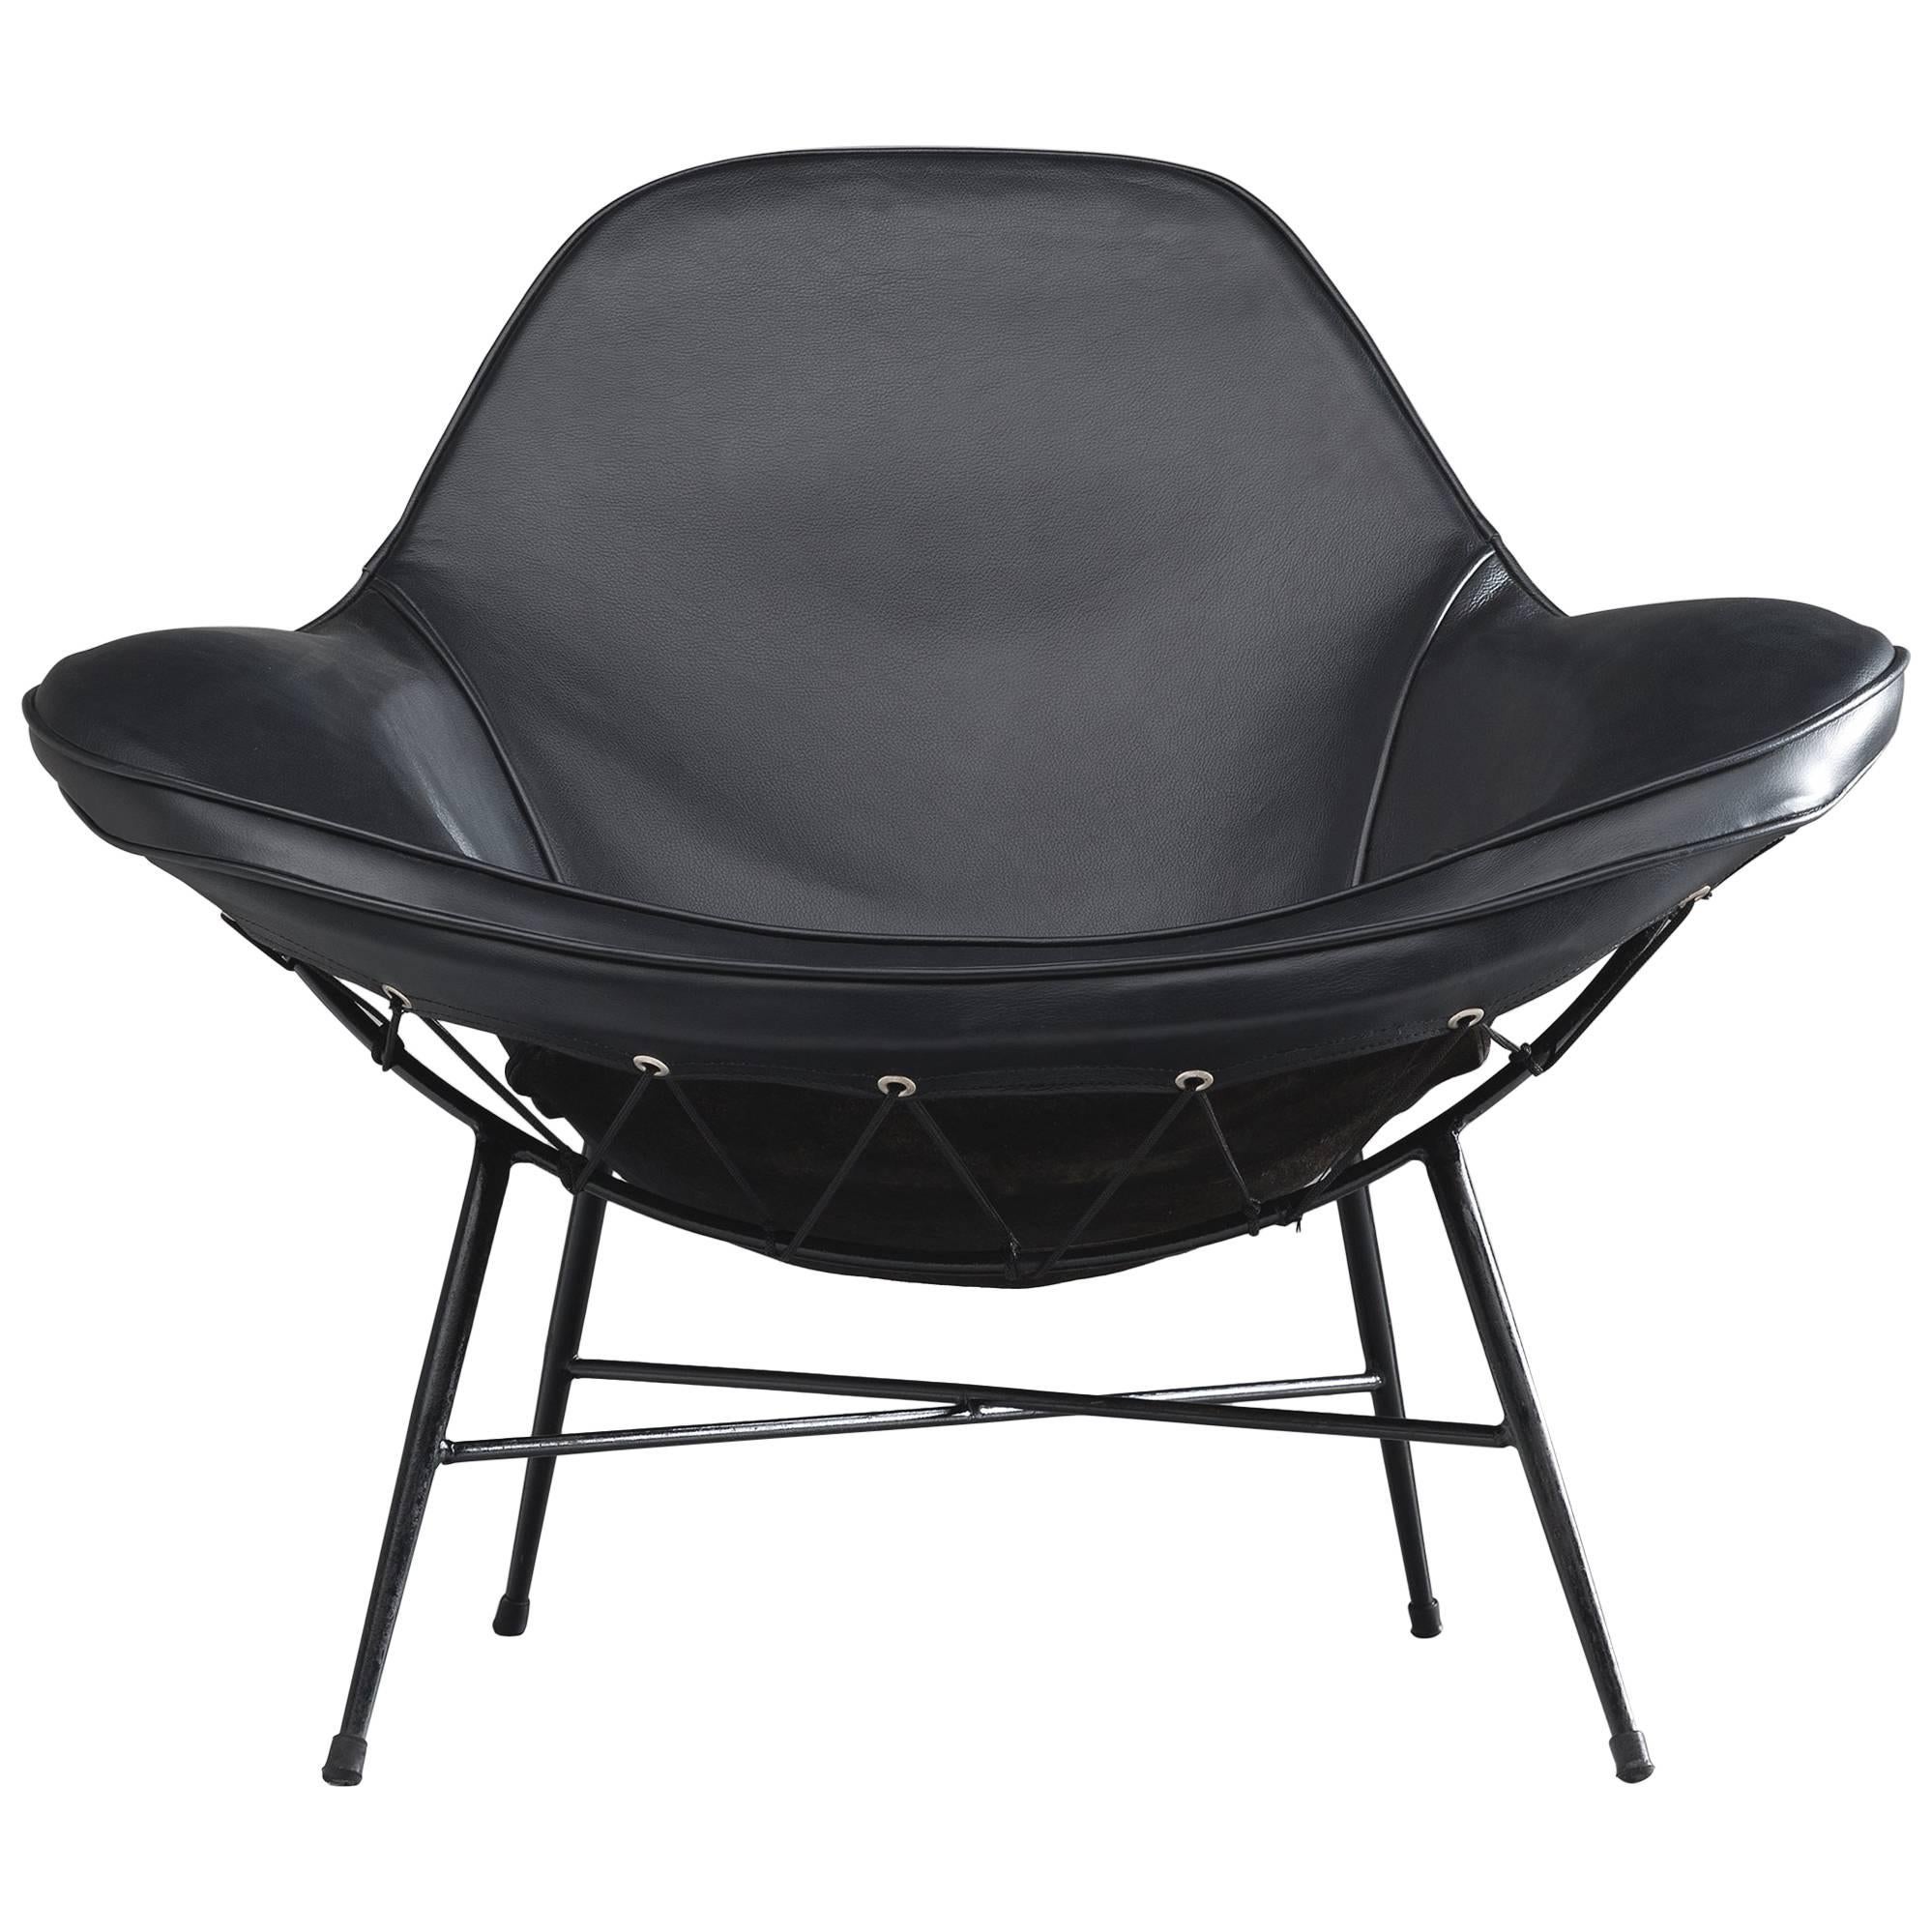 Armchair, iron, upholstery, cushion and leather, 1950.

This wide inviting armchair with thin black iron frame is designed by Martin Eisler. The seat of the chair is inviting, organic and comfortable. This shape is very iconic for the designs by